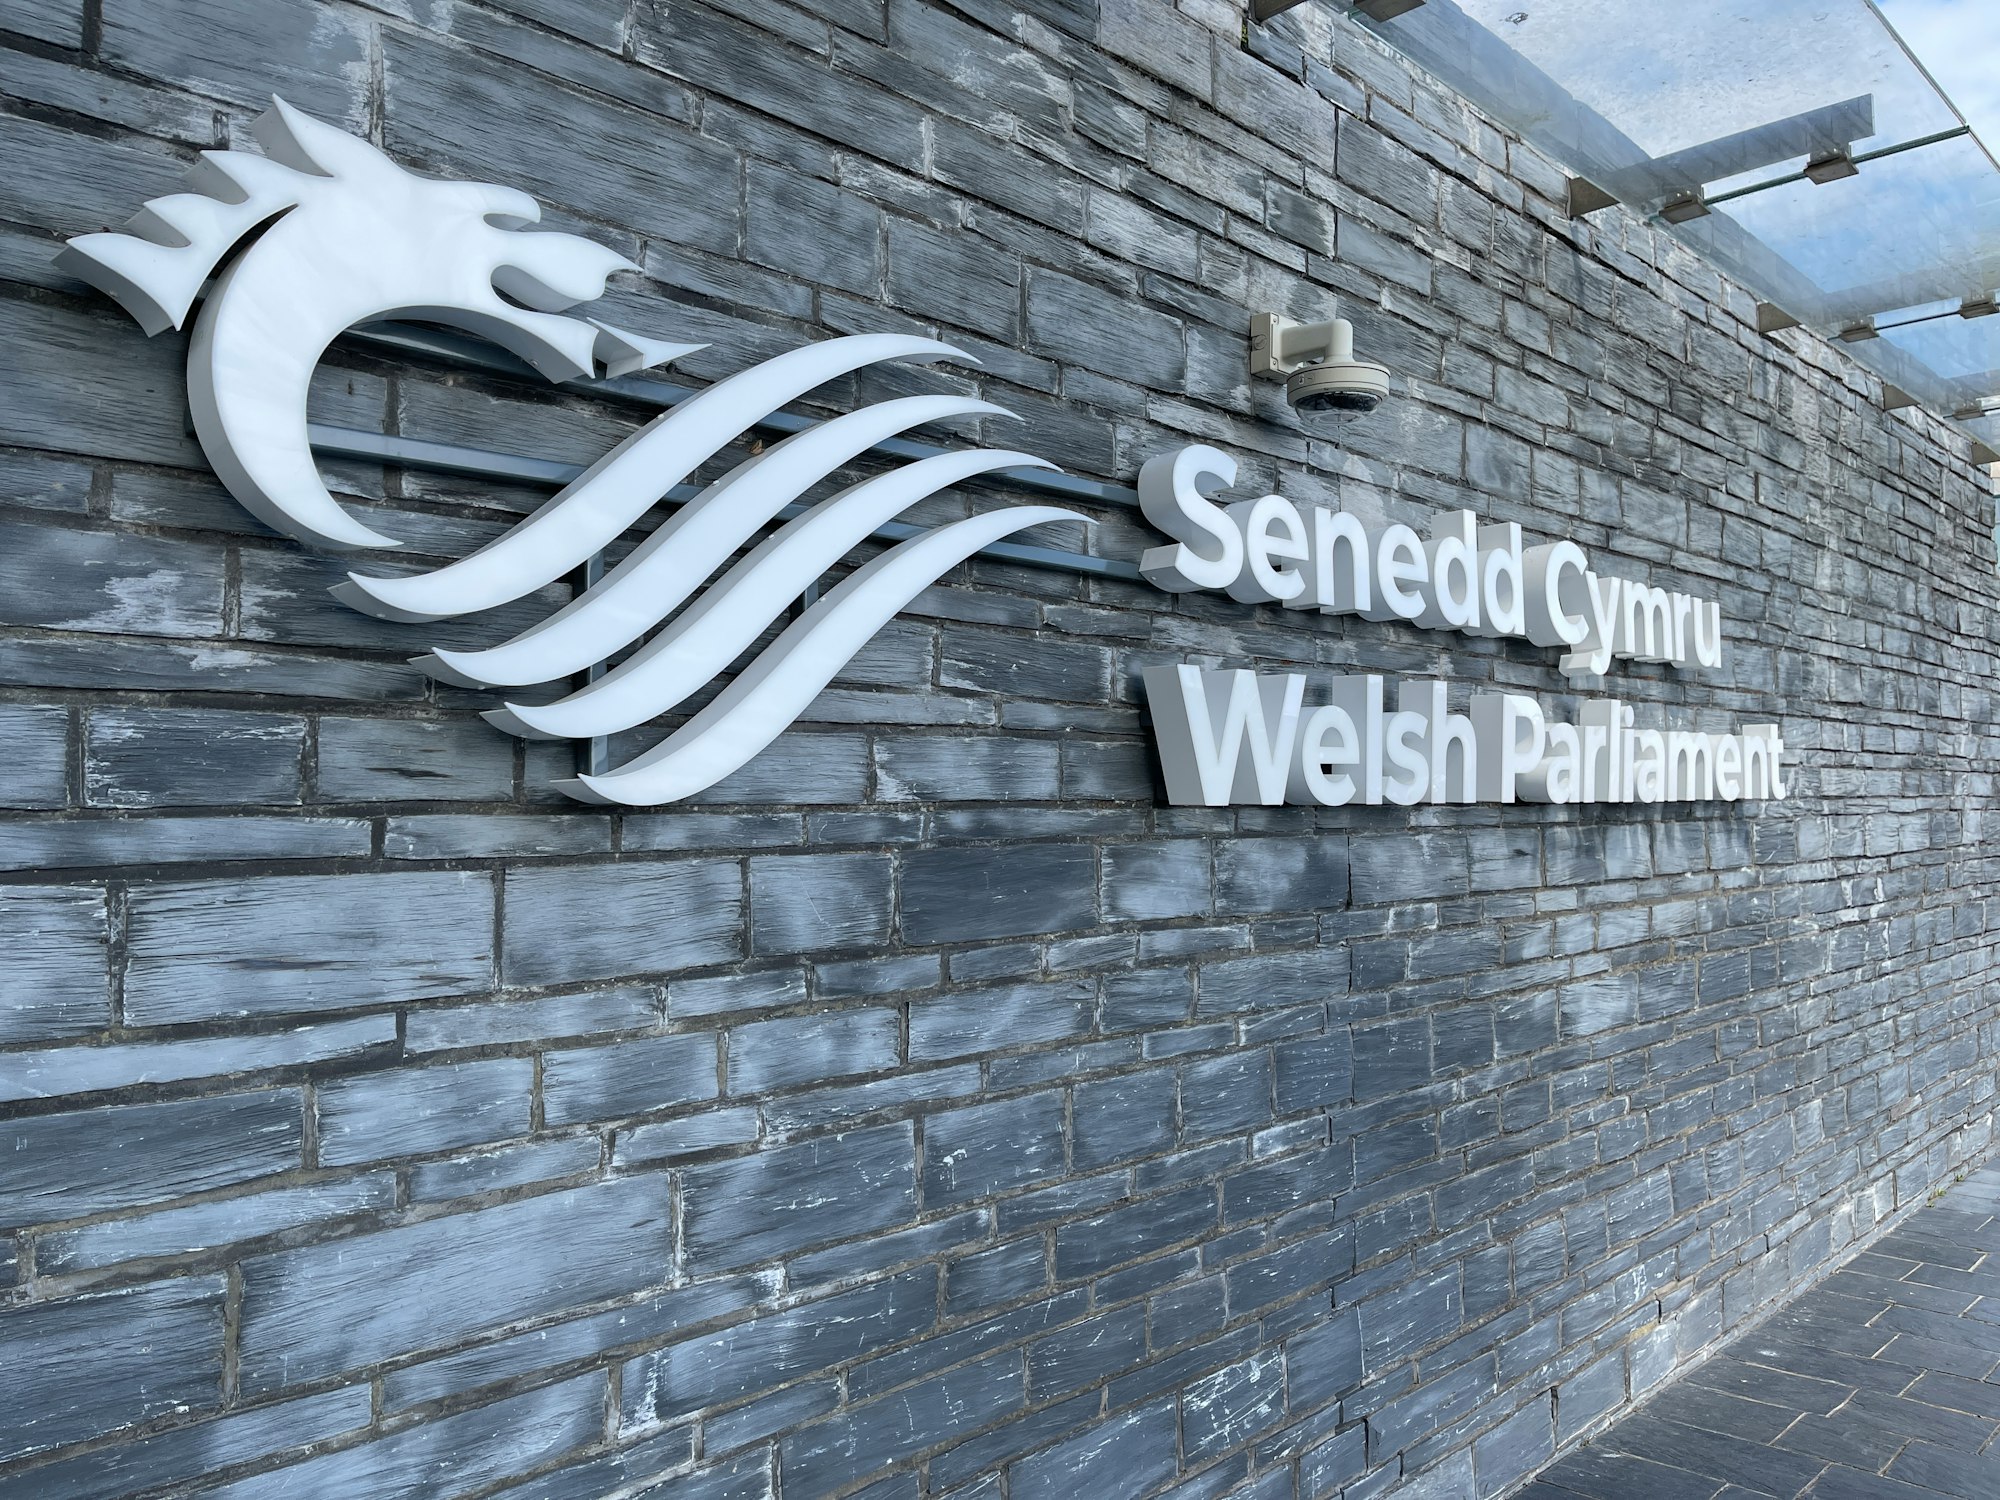 Welsh Sunday edition: Finance Minister refuses to back Programme for Government